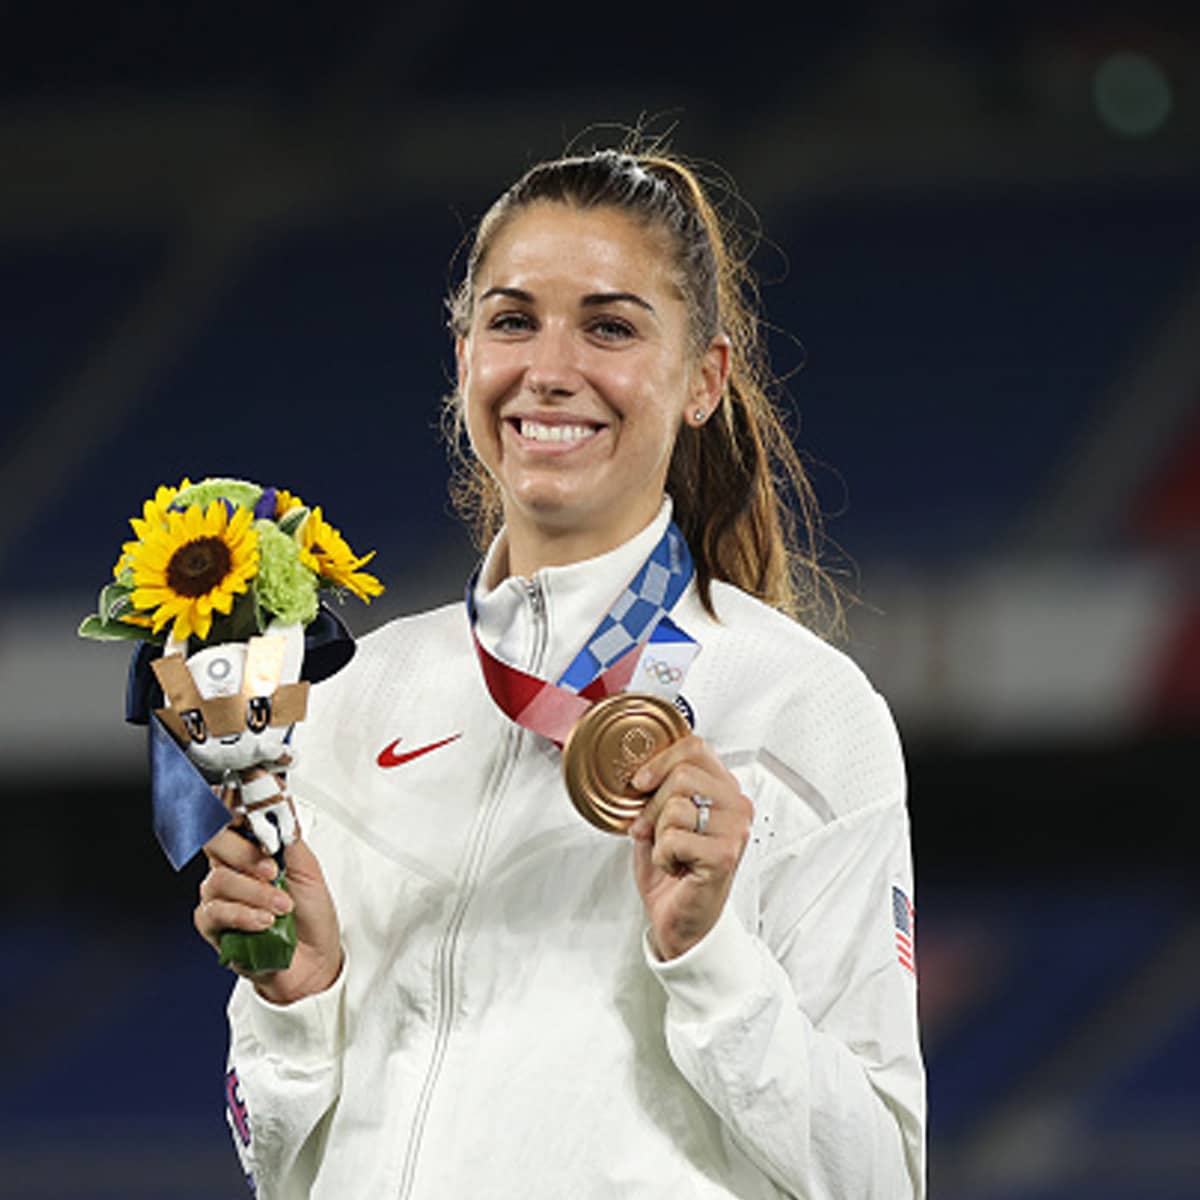 us soccer star alex morgan poses with her bronze medal